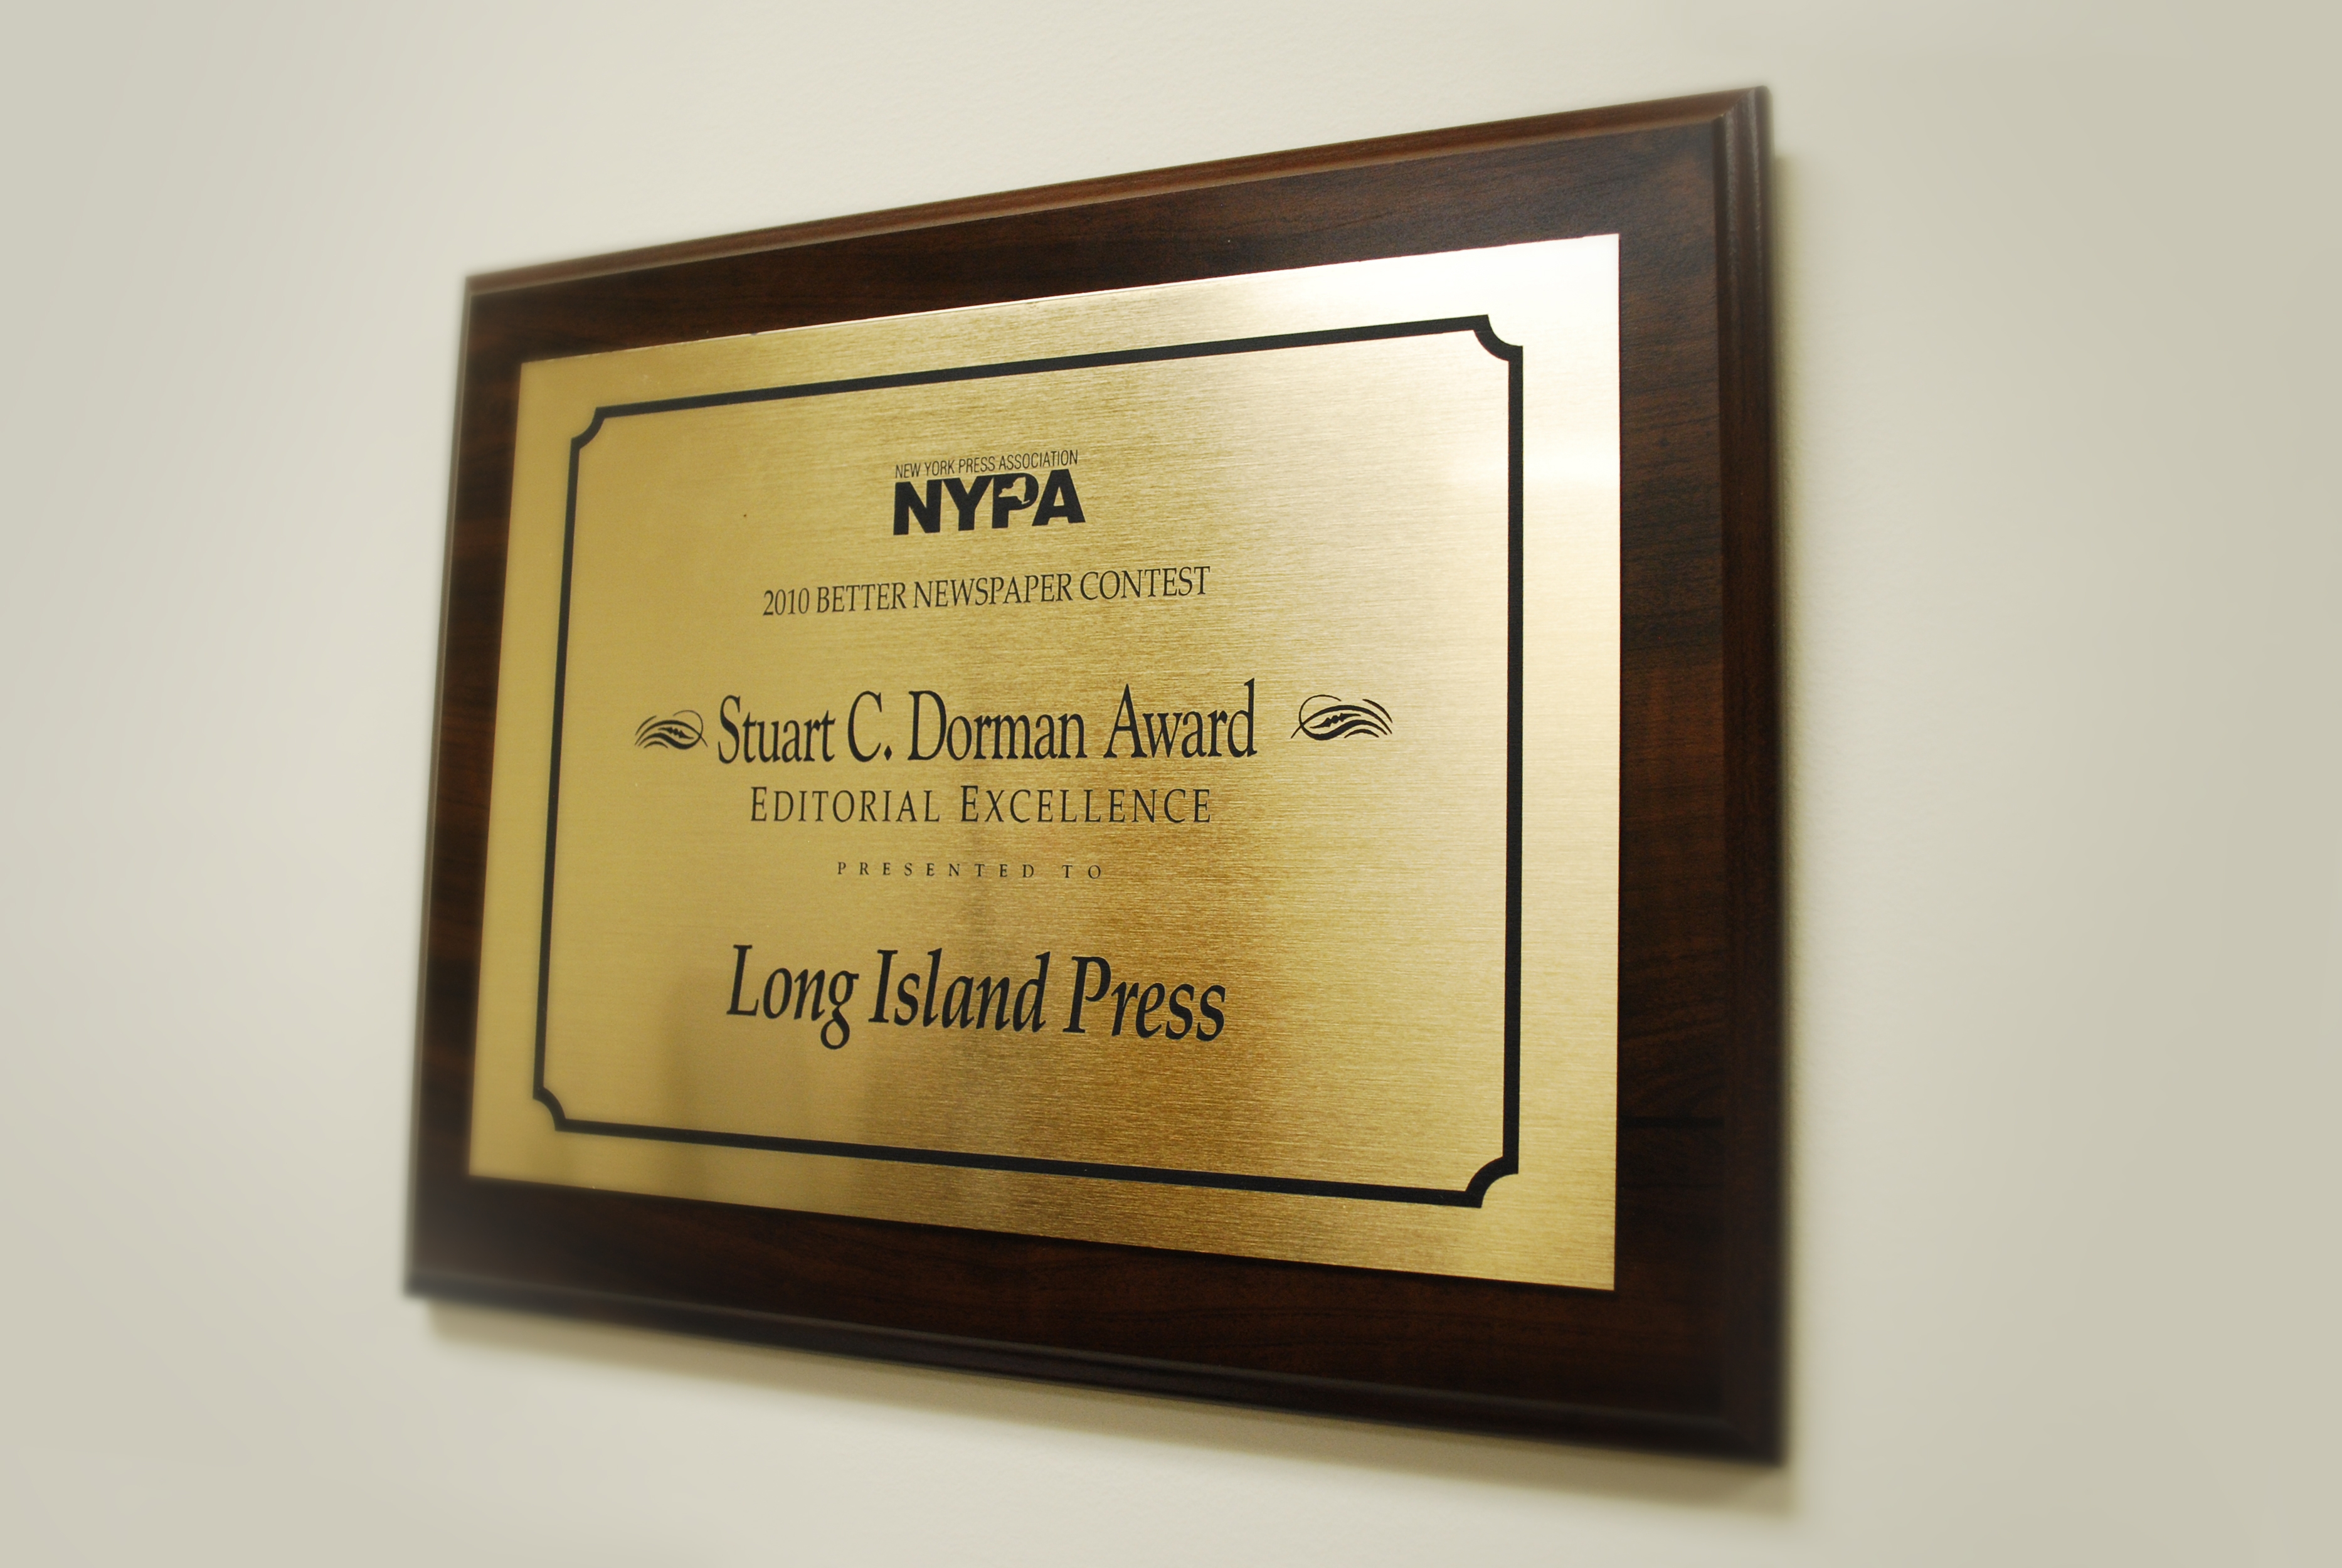 Long Island Press brought home New York Press Association's top prize, the Stuart C. Dorman Award for Editorial Excellence